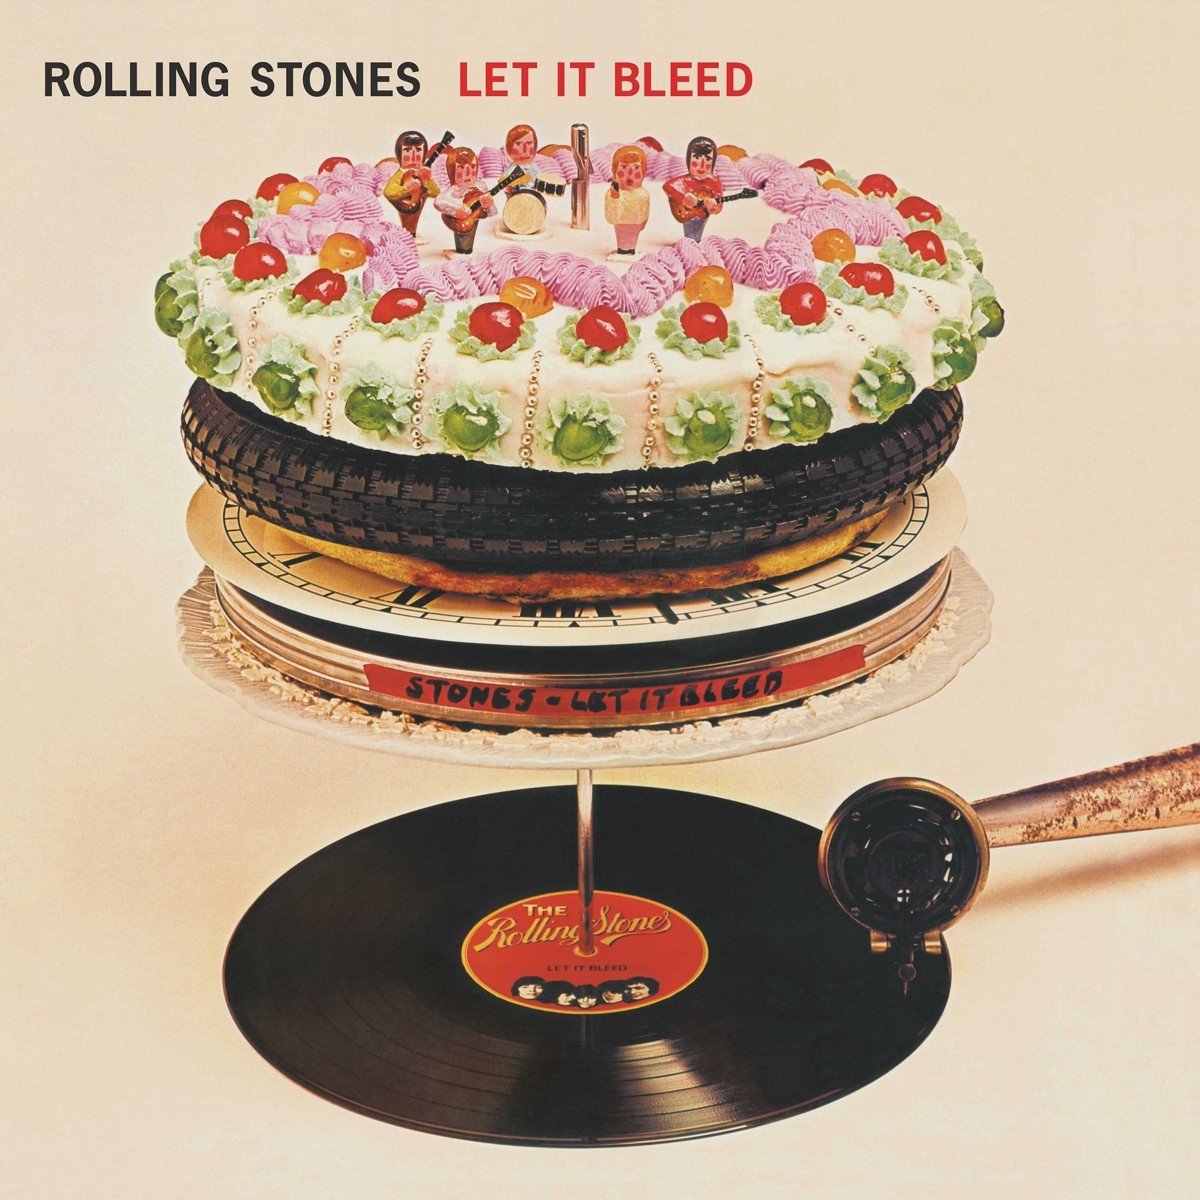 The Rolling Stones - Let It Bleed (LP) (50th Anniversary Edition) - The Rolling Stones